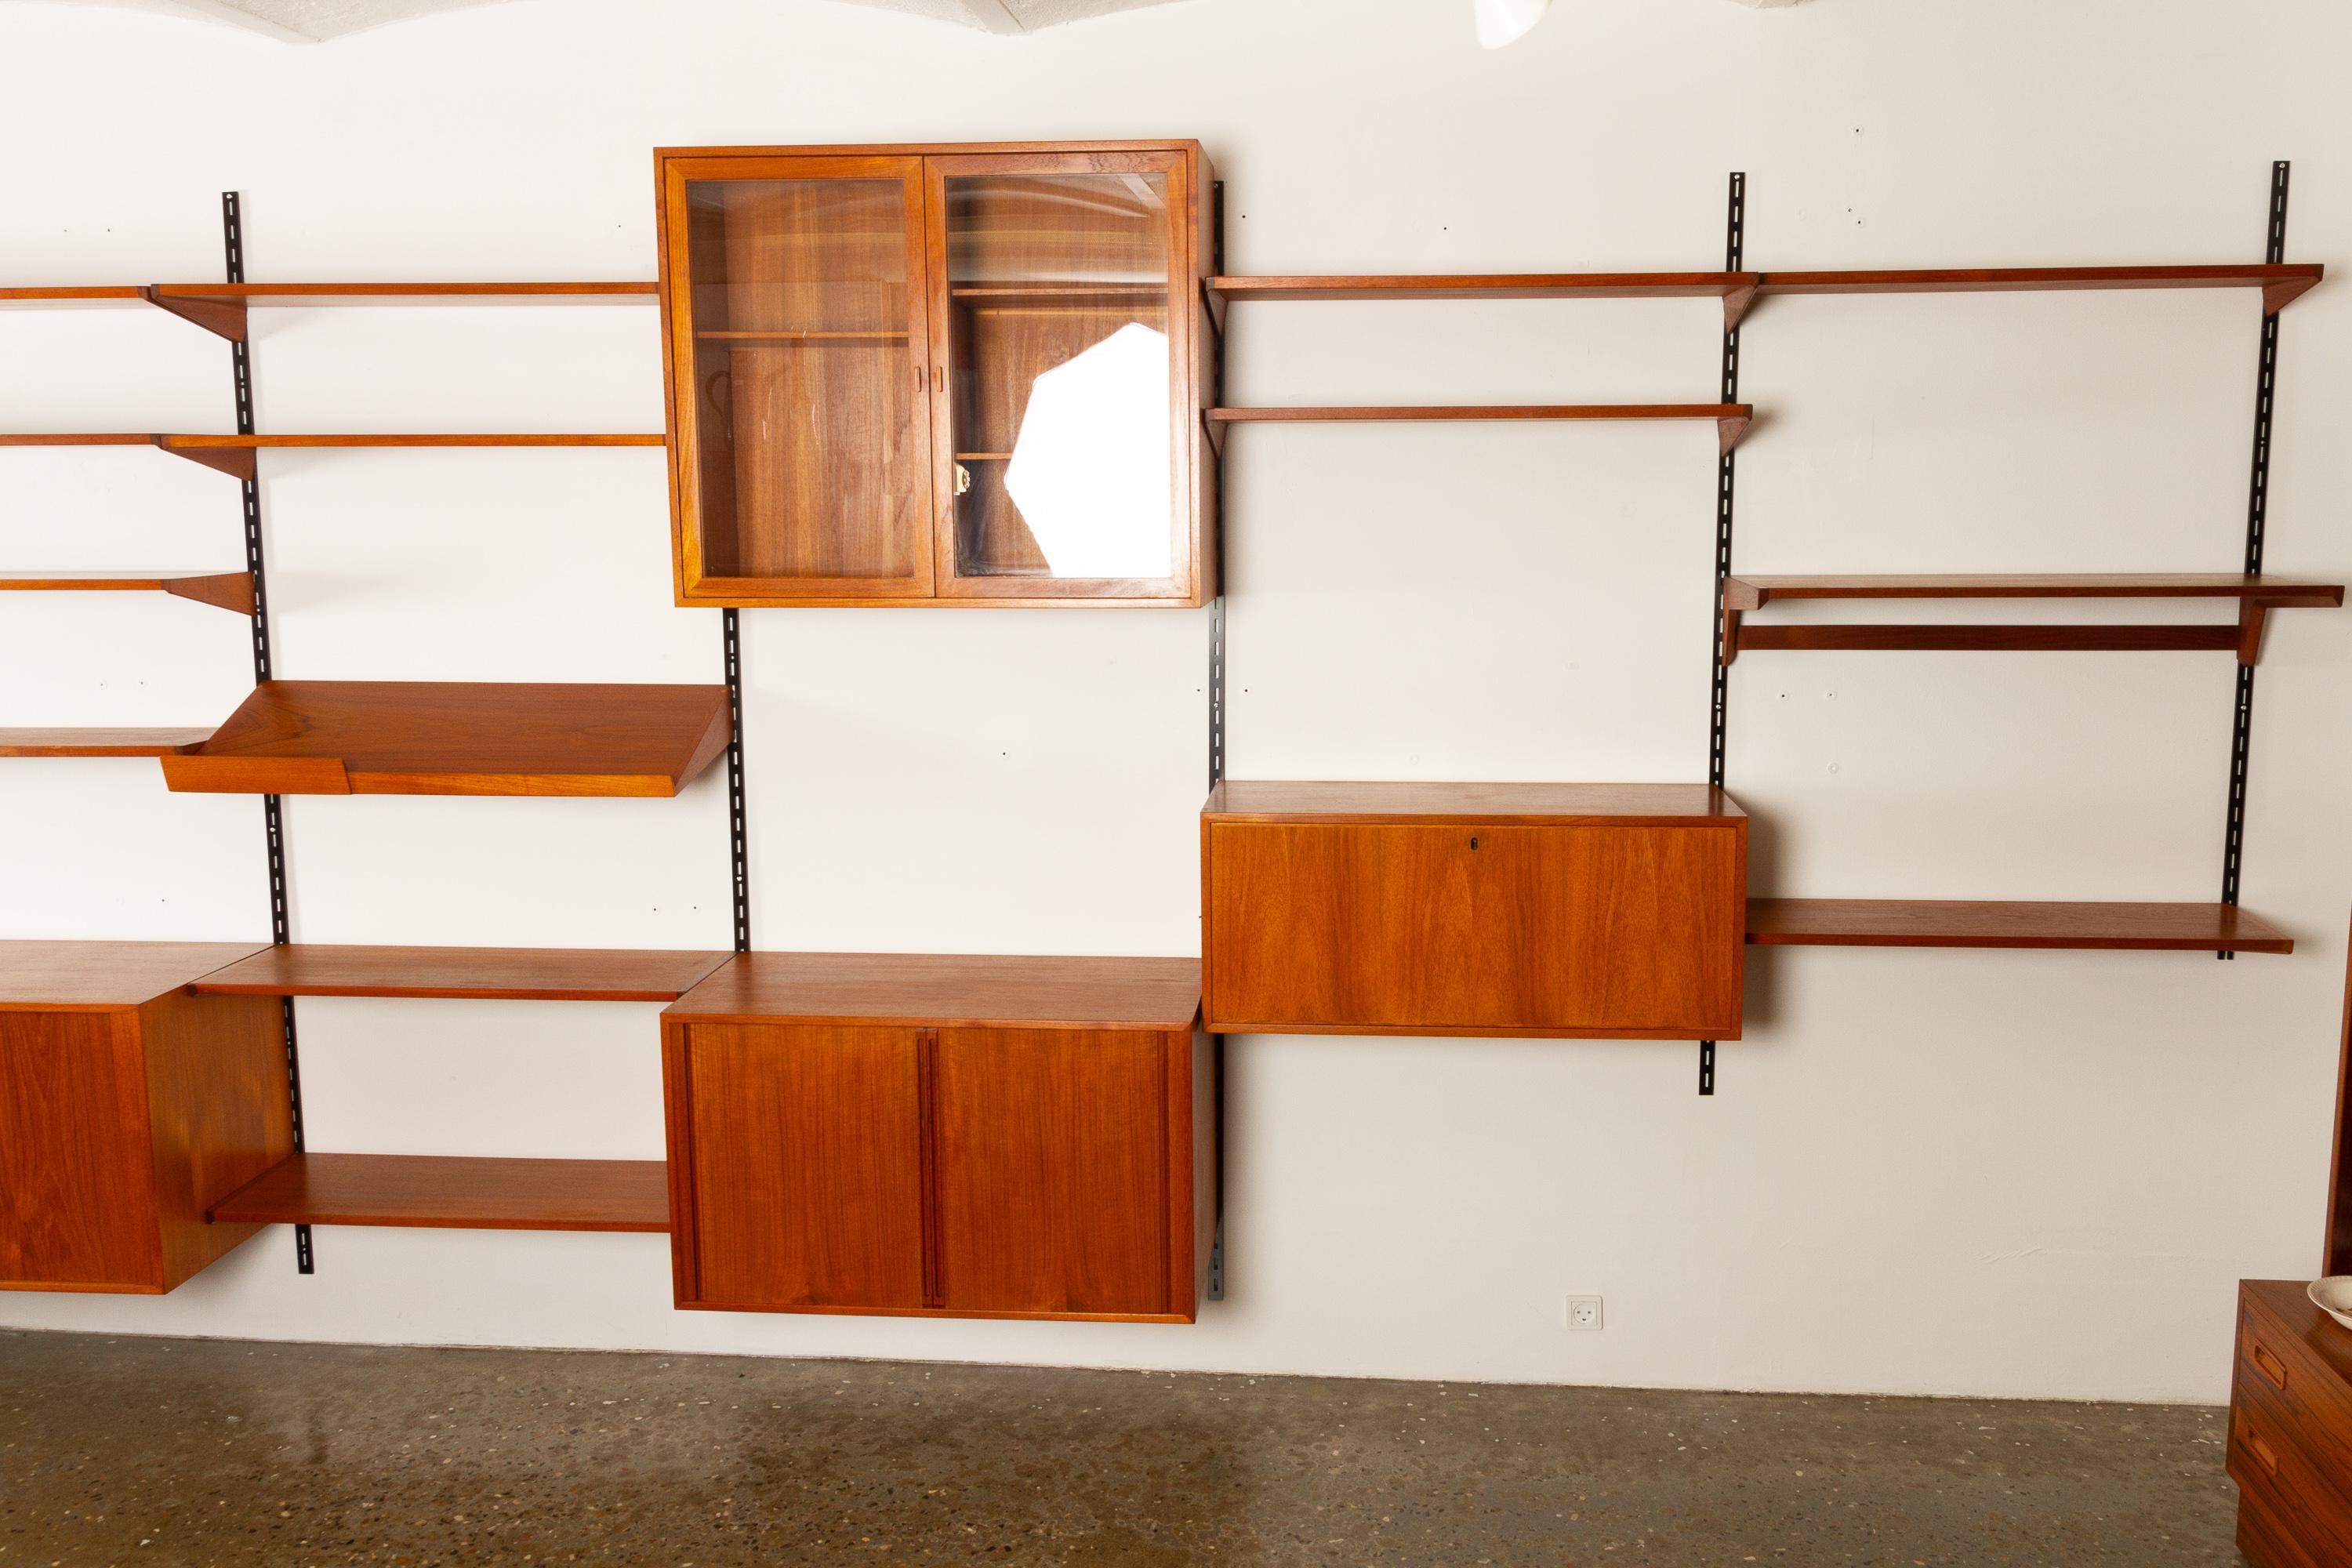 Danish teak wall unit by Kai Kristiansen for Feldballe Møbelfabrik, 1960s.
Large teak wall unit in teak with many cabinets and shelves. This is the well known model FM Reol from Danish manufacturer Feldballes Møbelfabrik danish by famous Danish